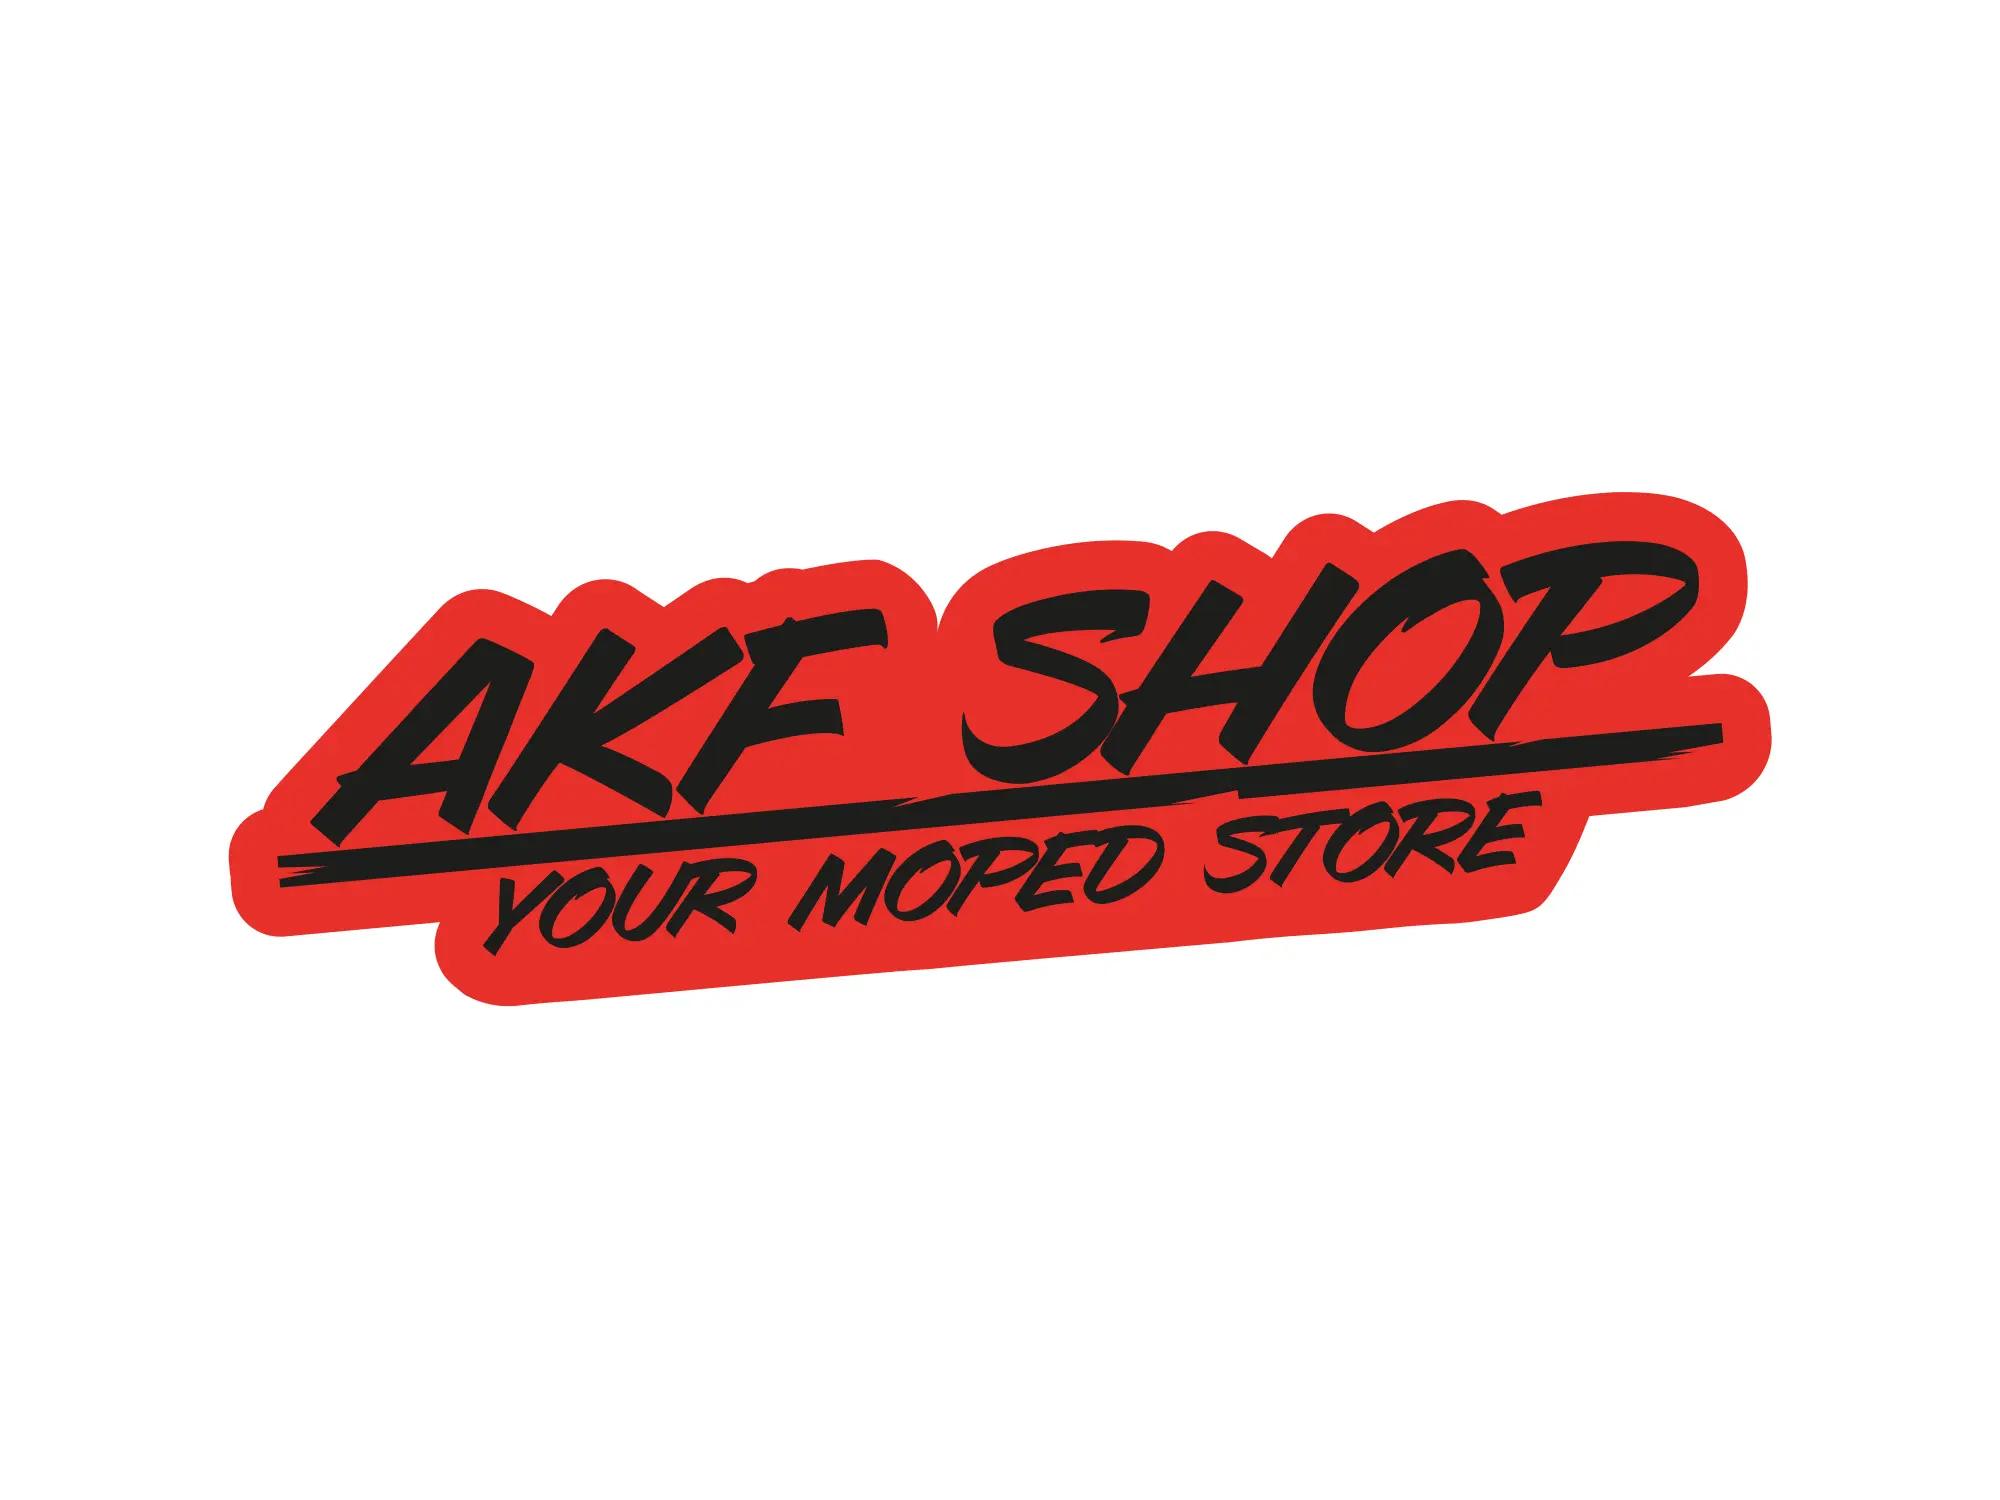 Sticker - AKF Shop - your moped store Grey/White, contour cut